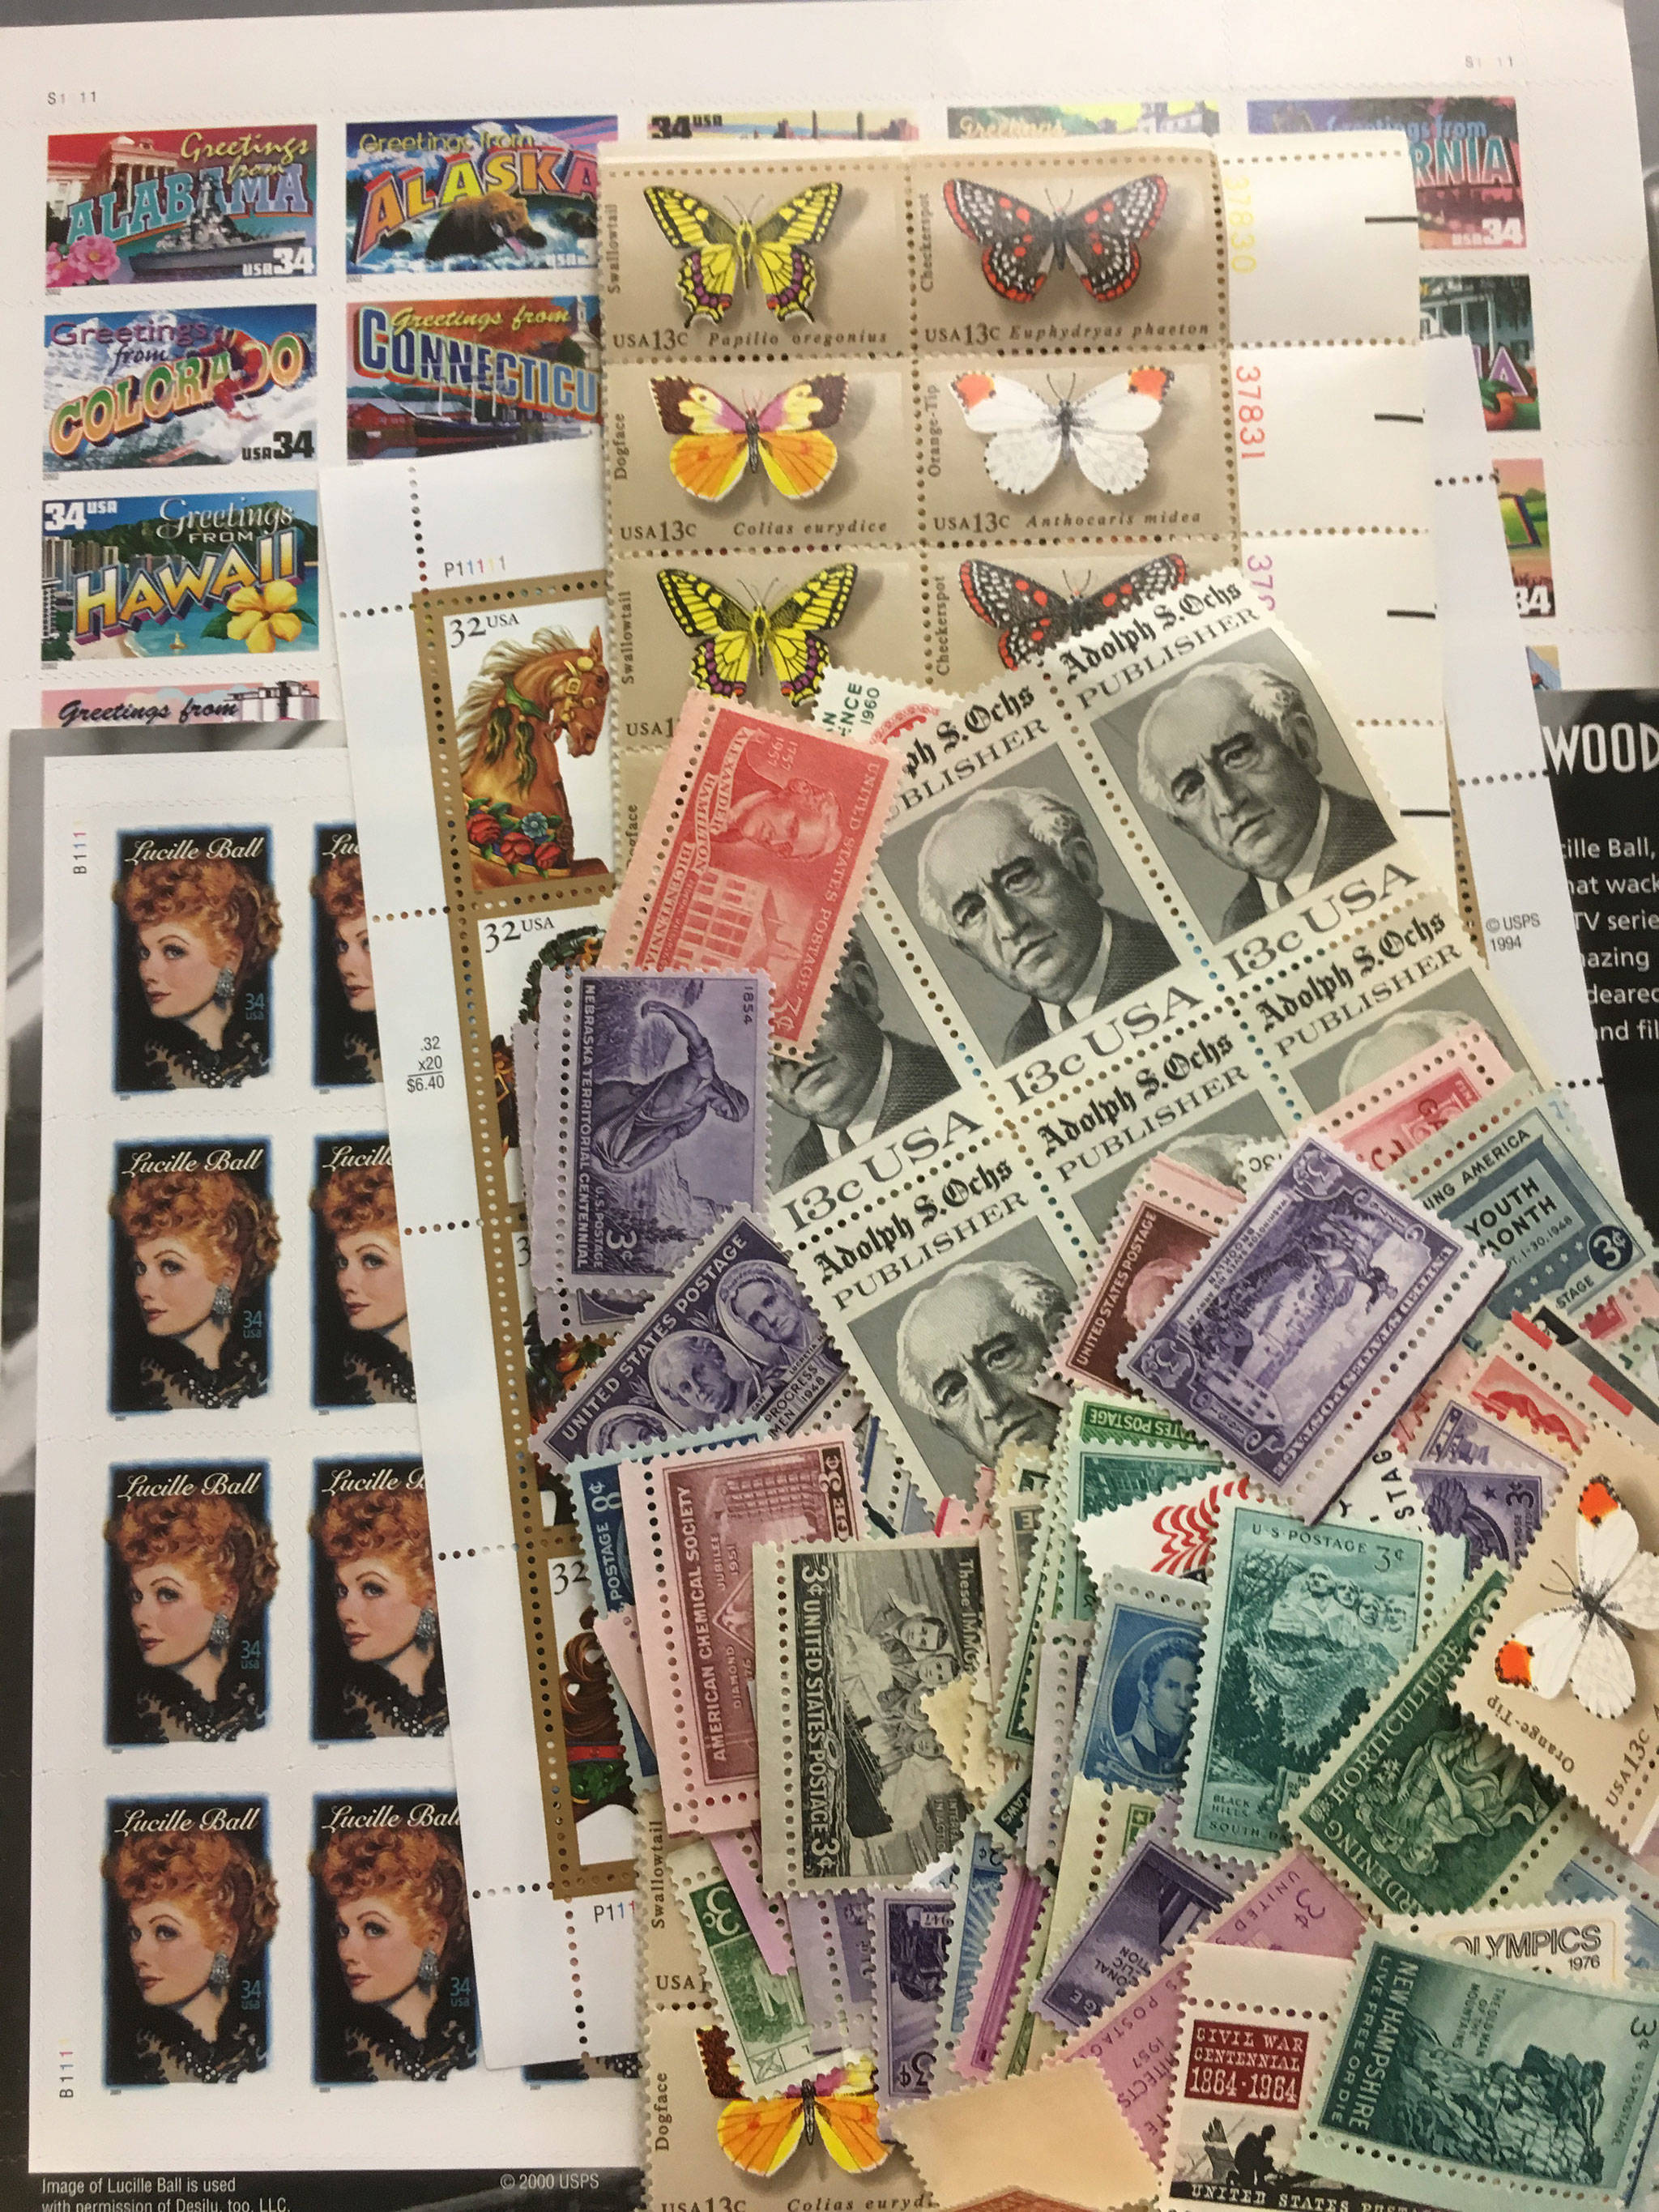 Henry Jones of the Strait Stamp Society said he creates stamp kits to donate and/or auction off so that people can have stamps to help beautify their mail because today’s stamps can be boring. (Matthew Nash/Olympic Peninsula News Group)